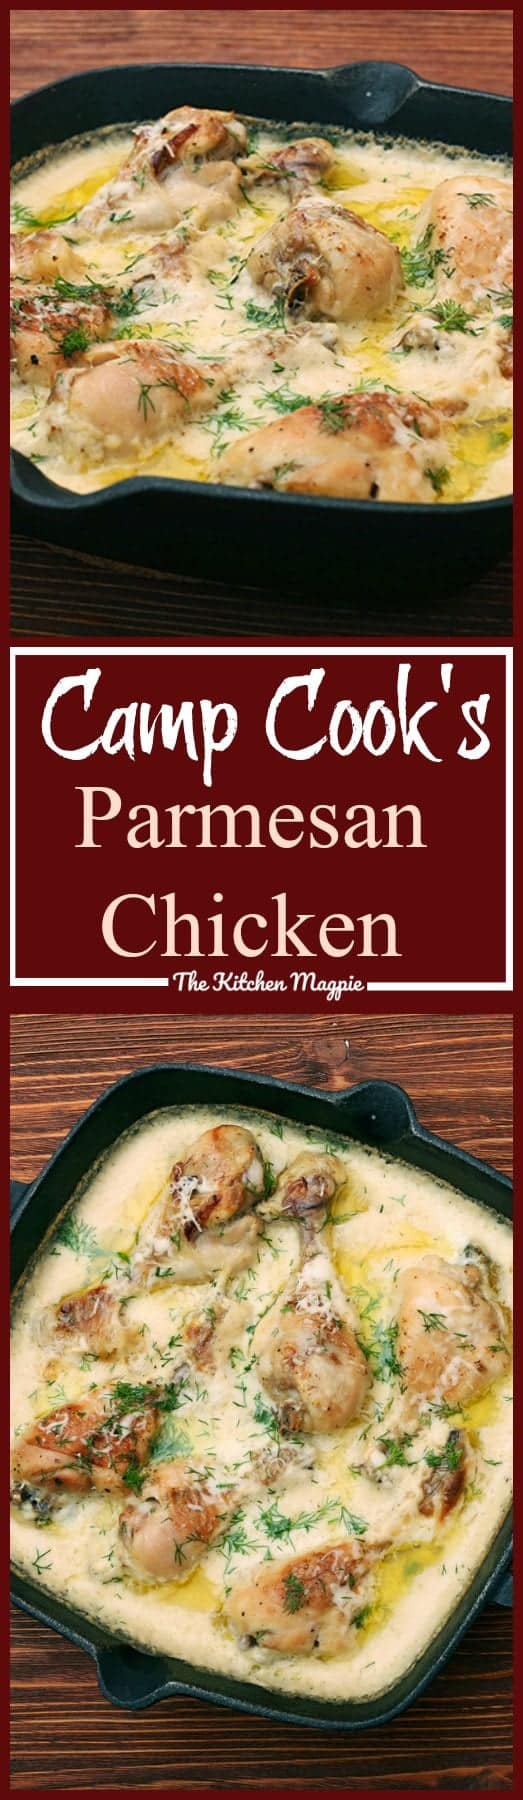 Camp Cook's Parmesan Chicken - This recipe from a hunting camp cook is so easy to make with a can of mushroom soup and chicken breaded with crumbs & Parmesan cheese! 